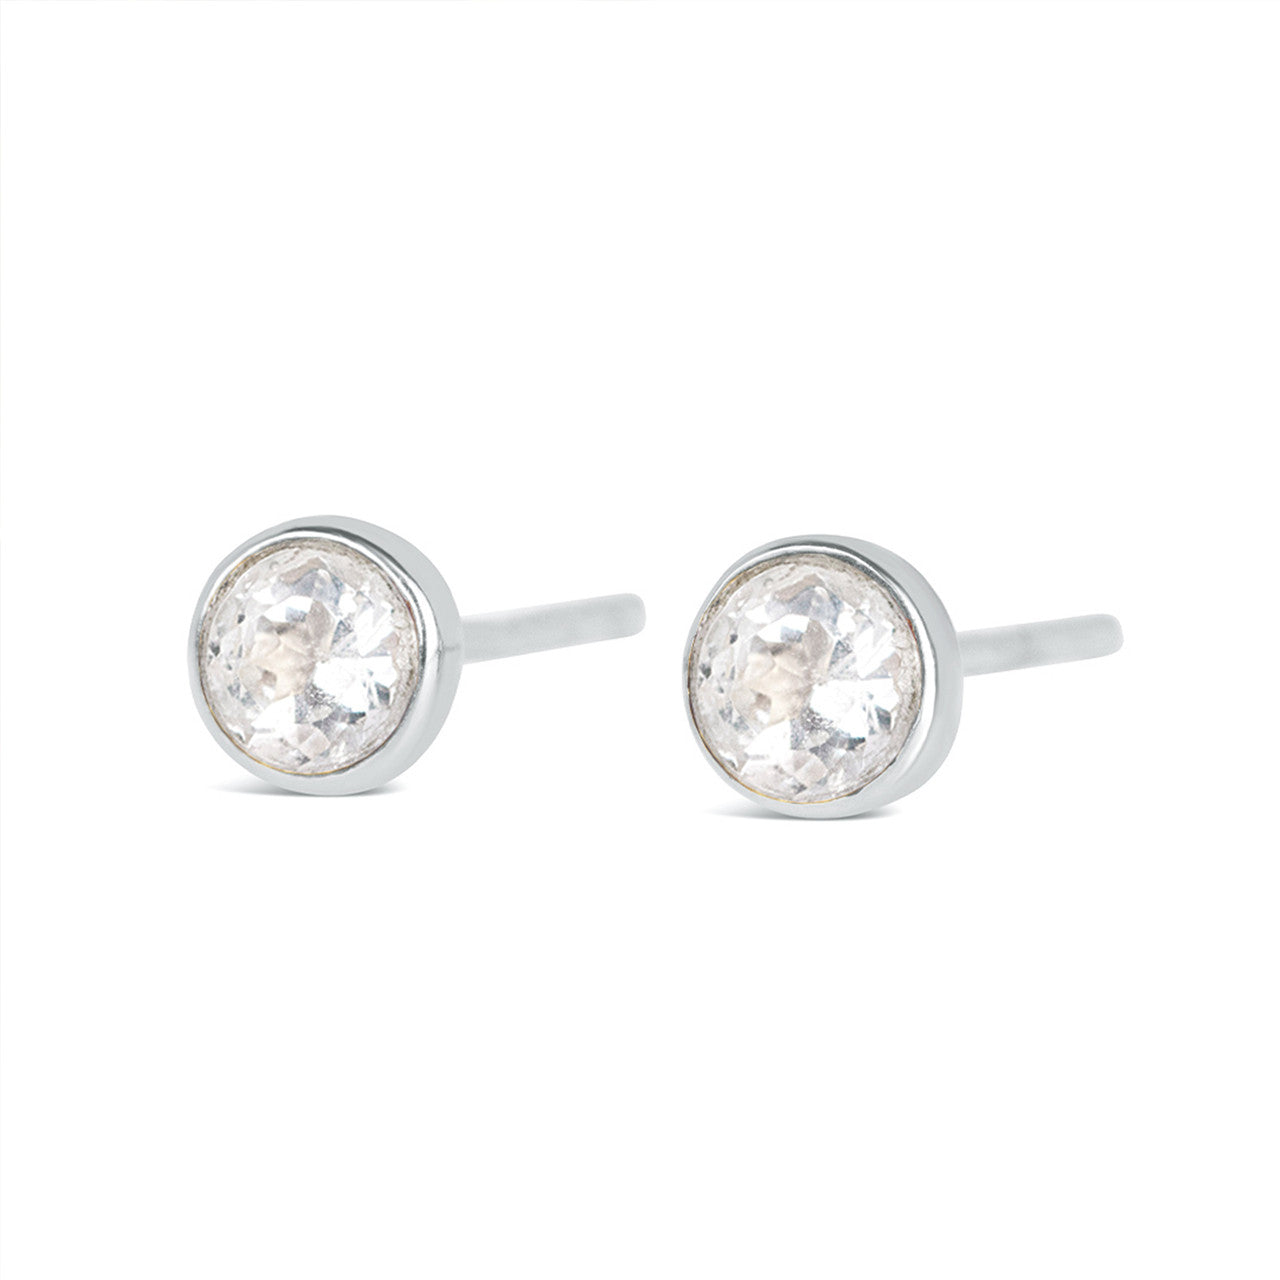 White quartz mini stud earrings in silver facing the front on a white background